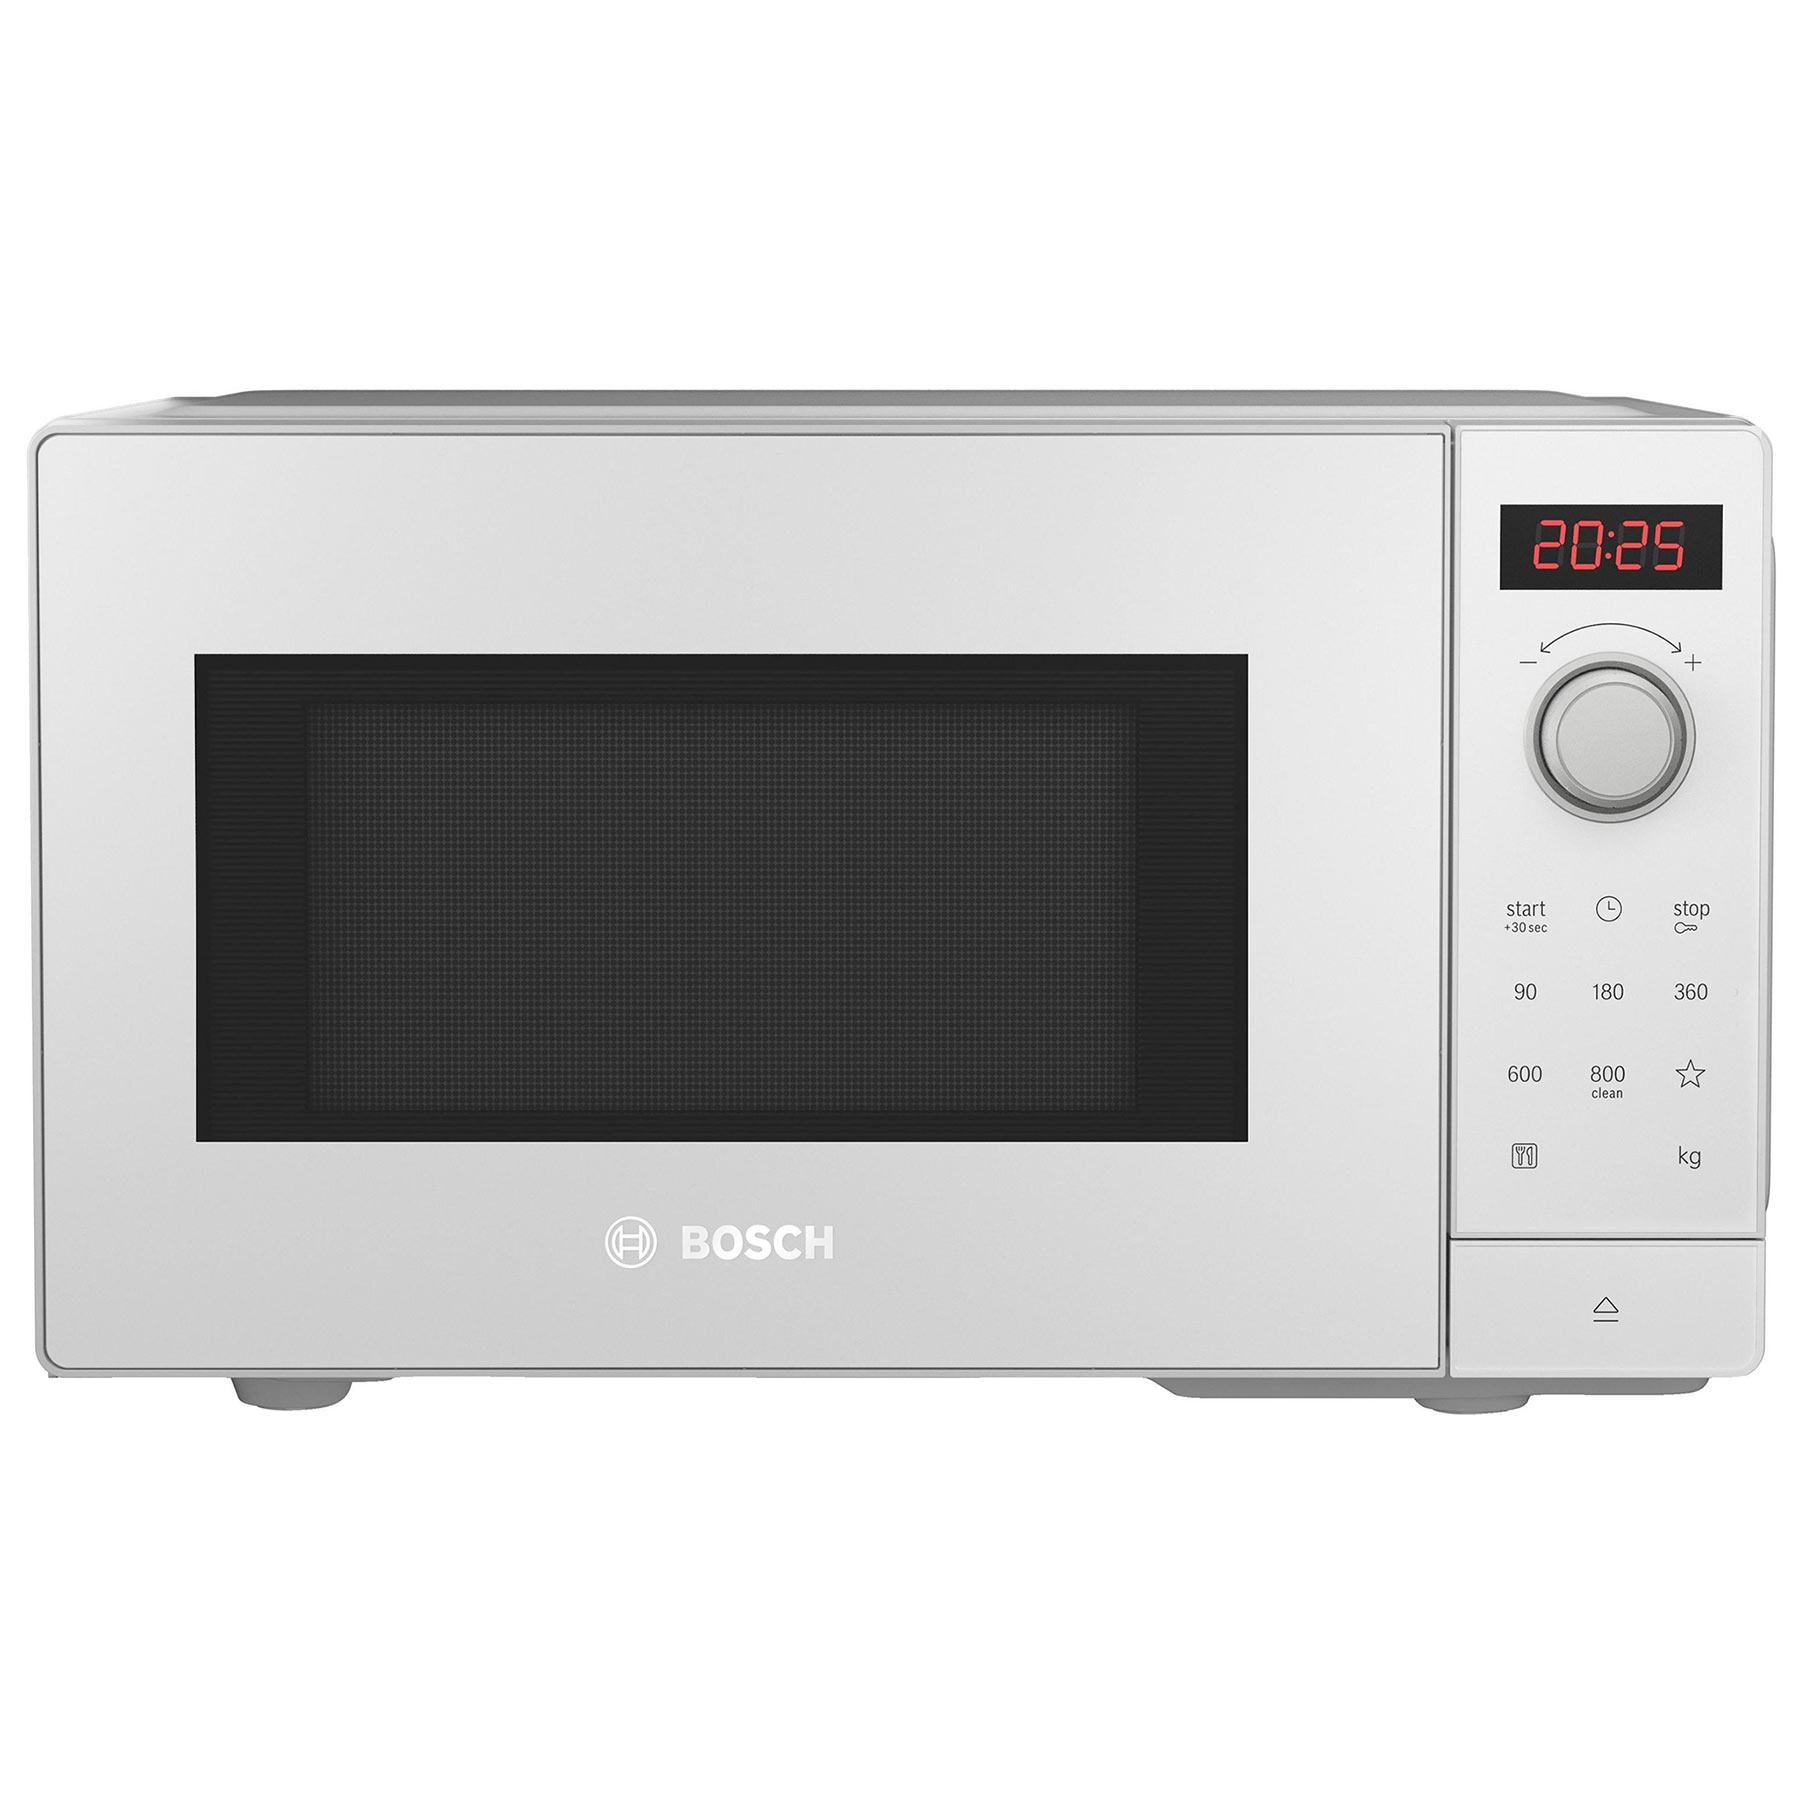 Image of Bosch FFL023MW0B Series 2 Solo Microwave Oven in White 20L 800W